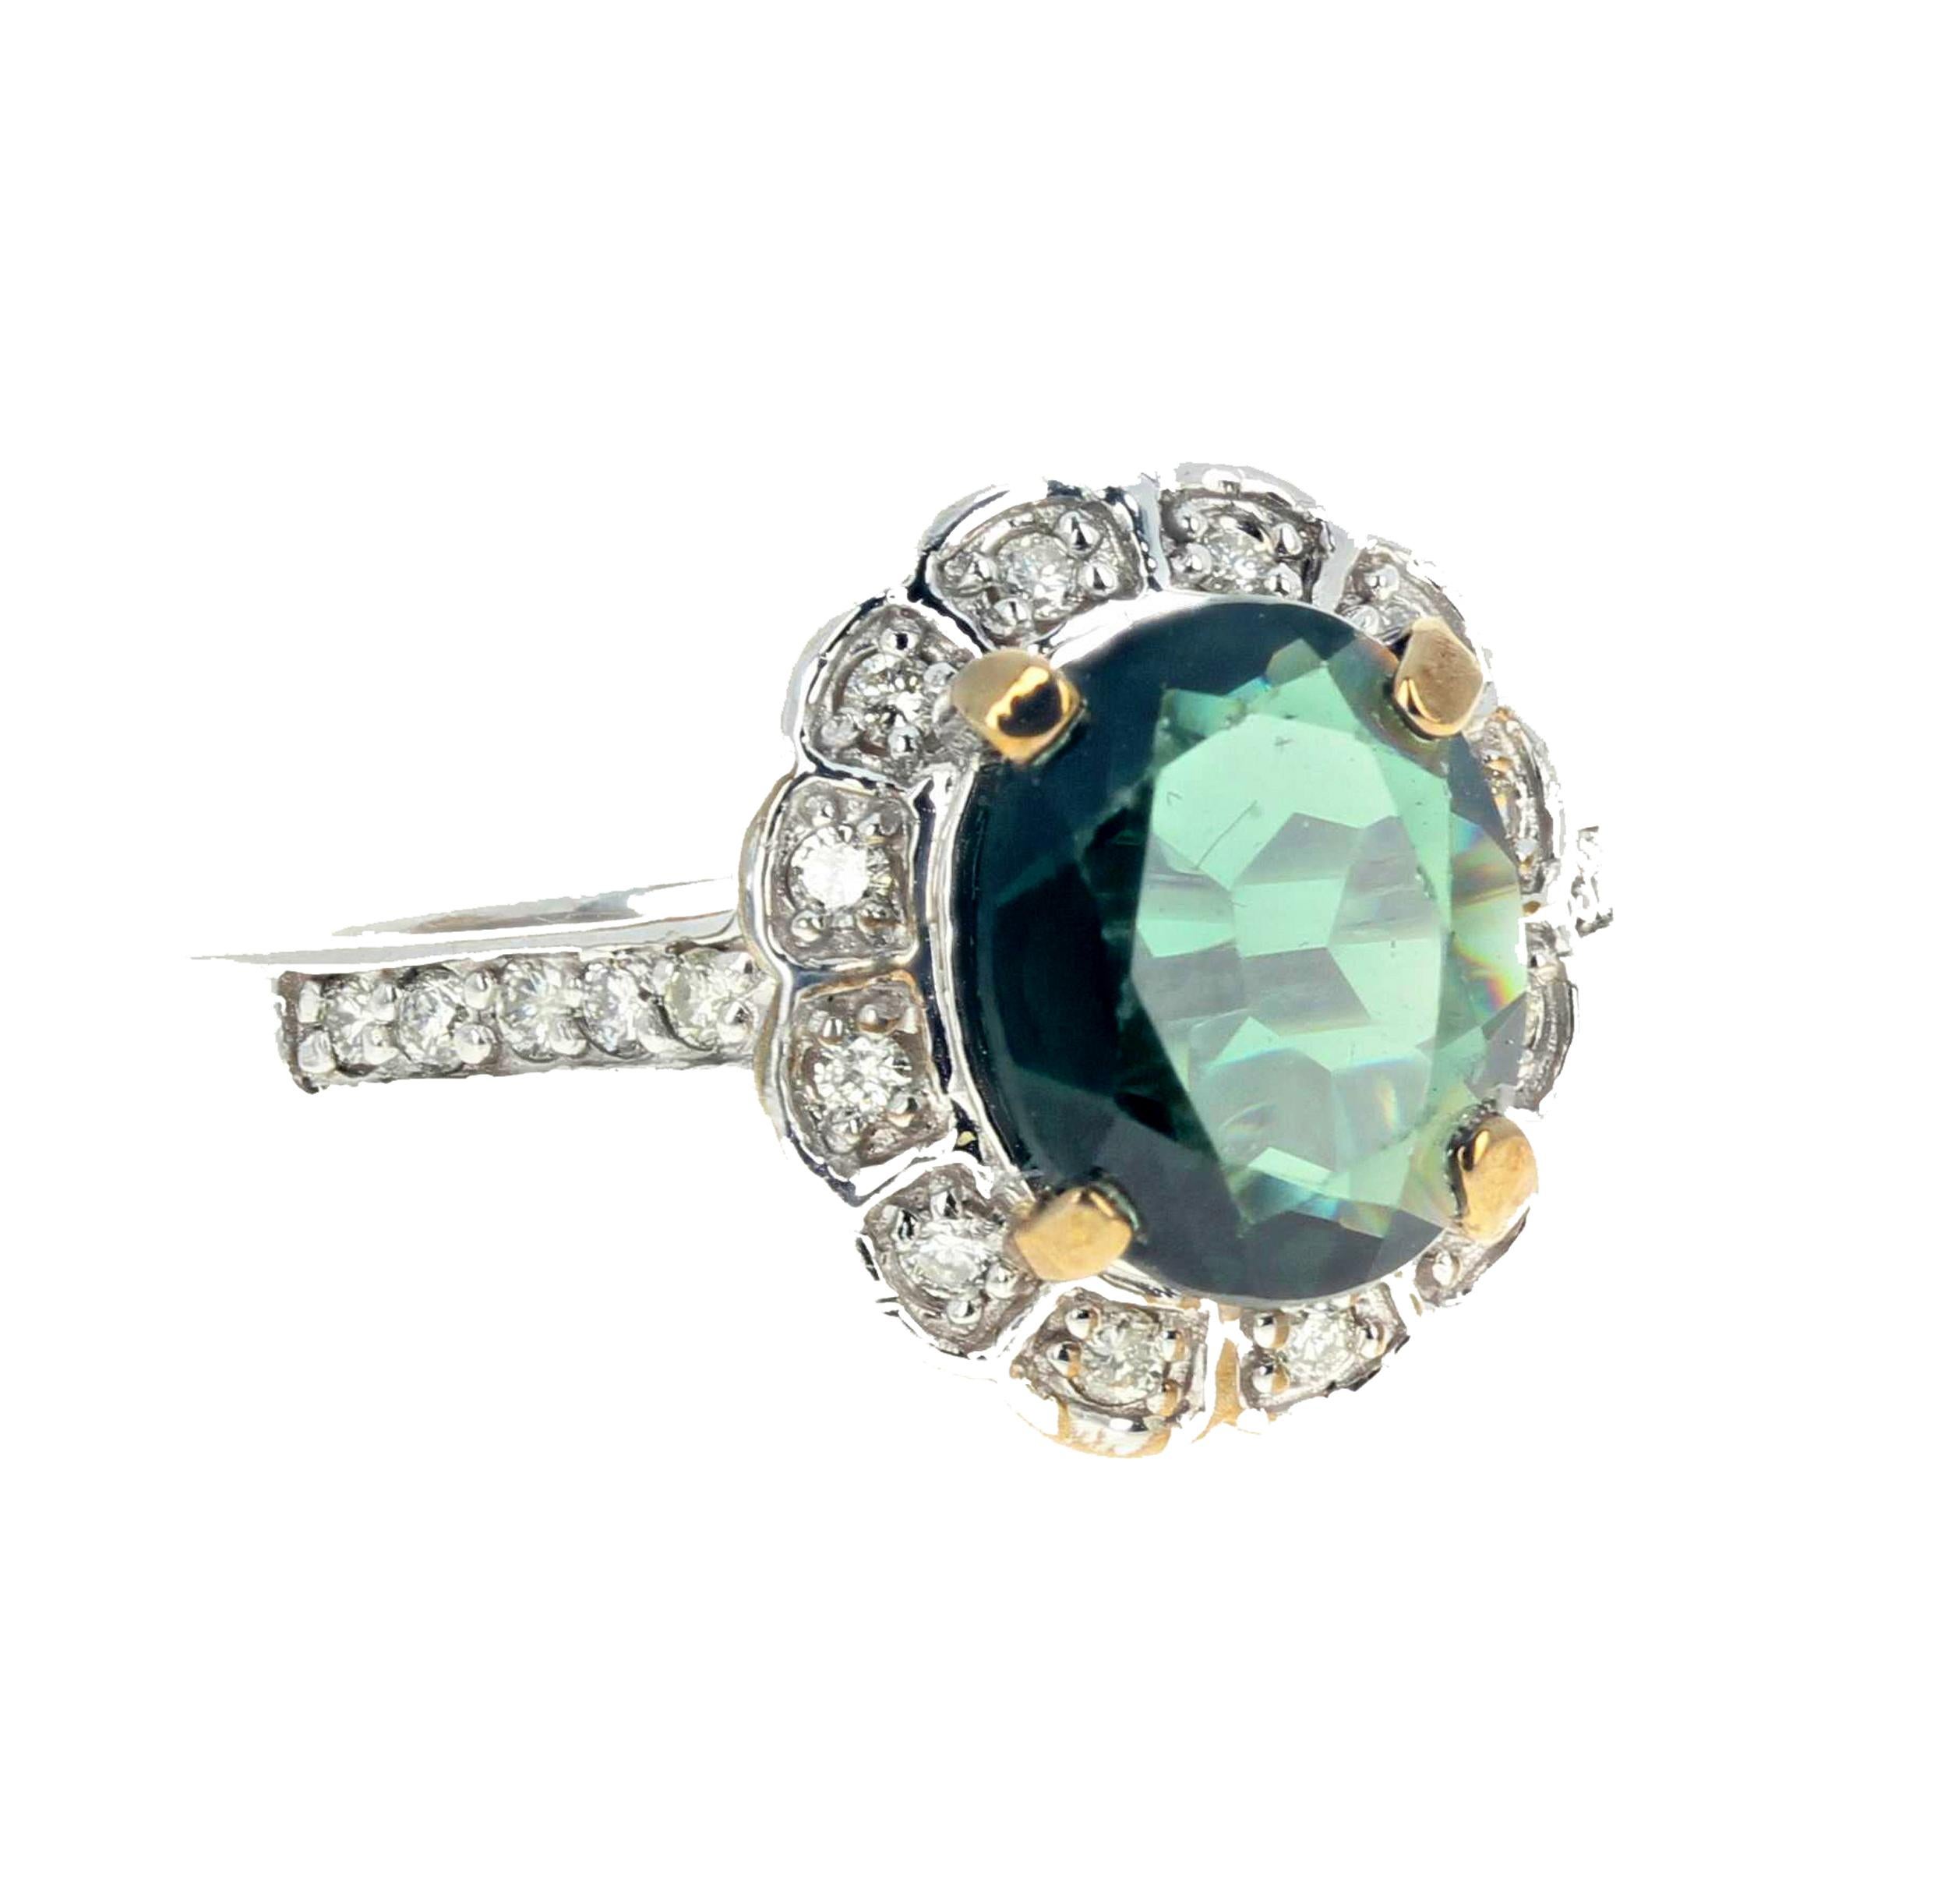 AJD Intensely Glowing 2.23 Ct Green Apatite & White Diamonds Ring In New Condition For Sale In Raleigh, NC